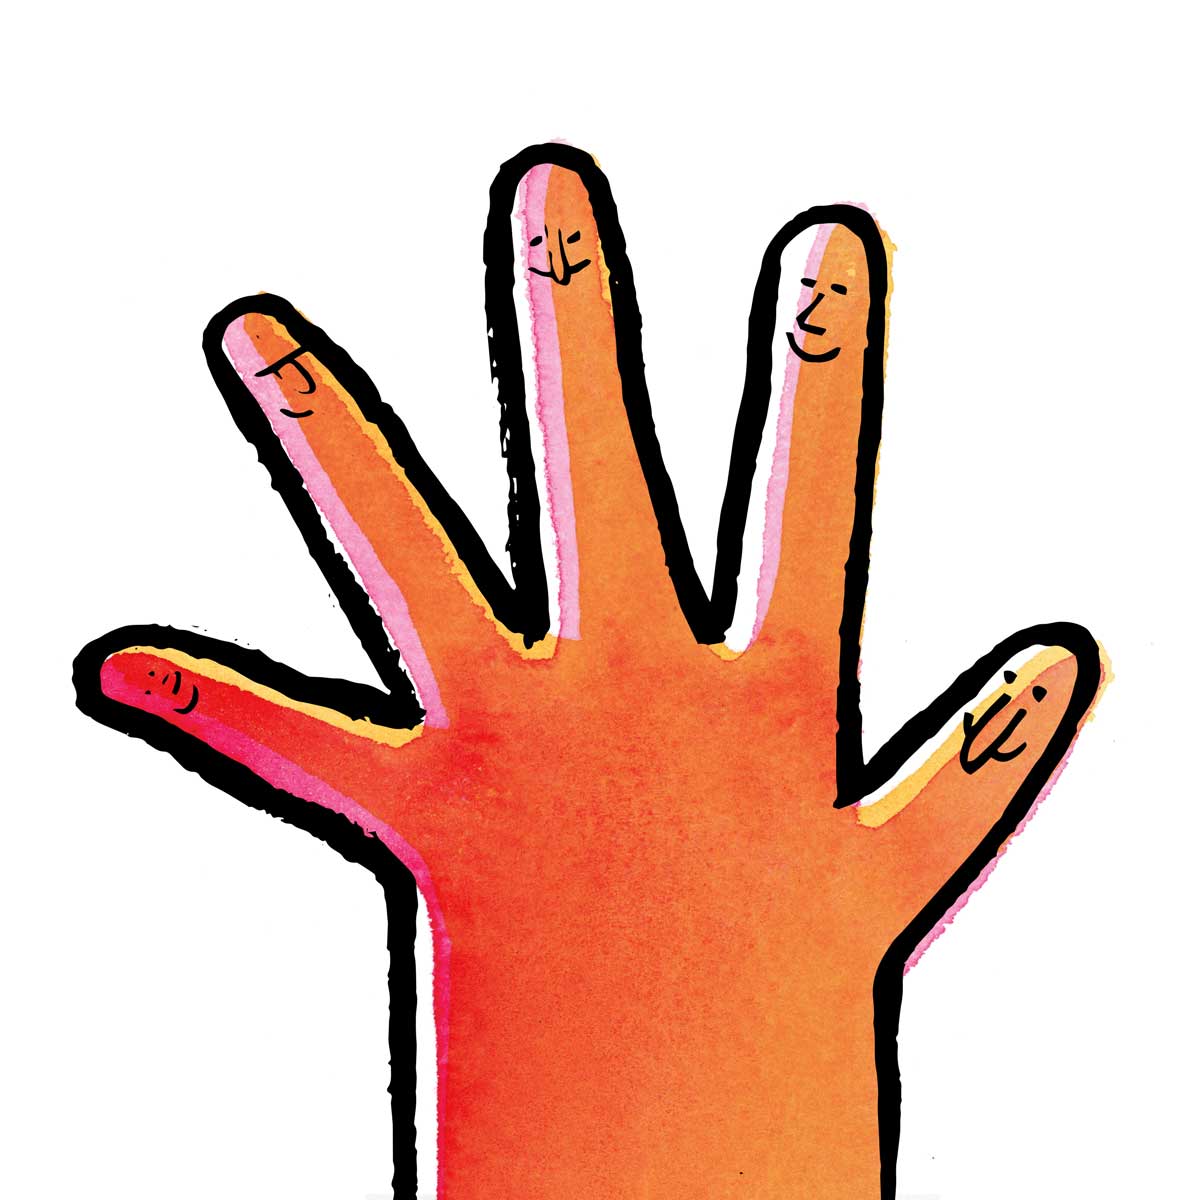 a hand showing all five fingers